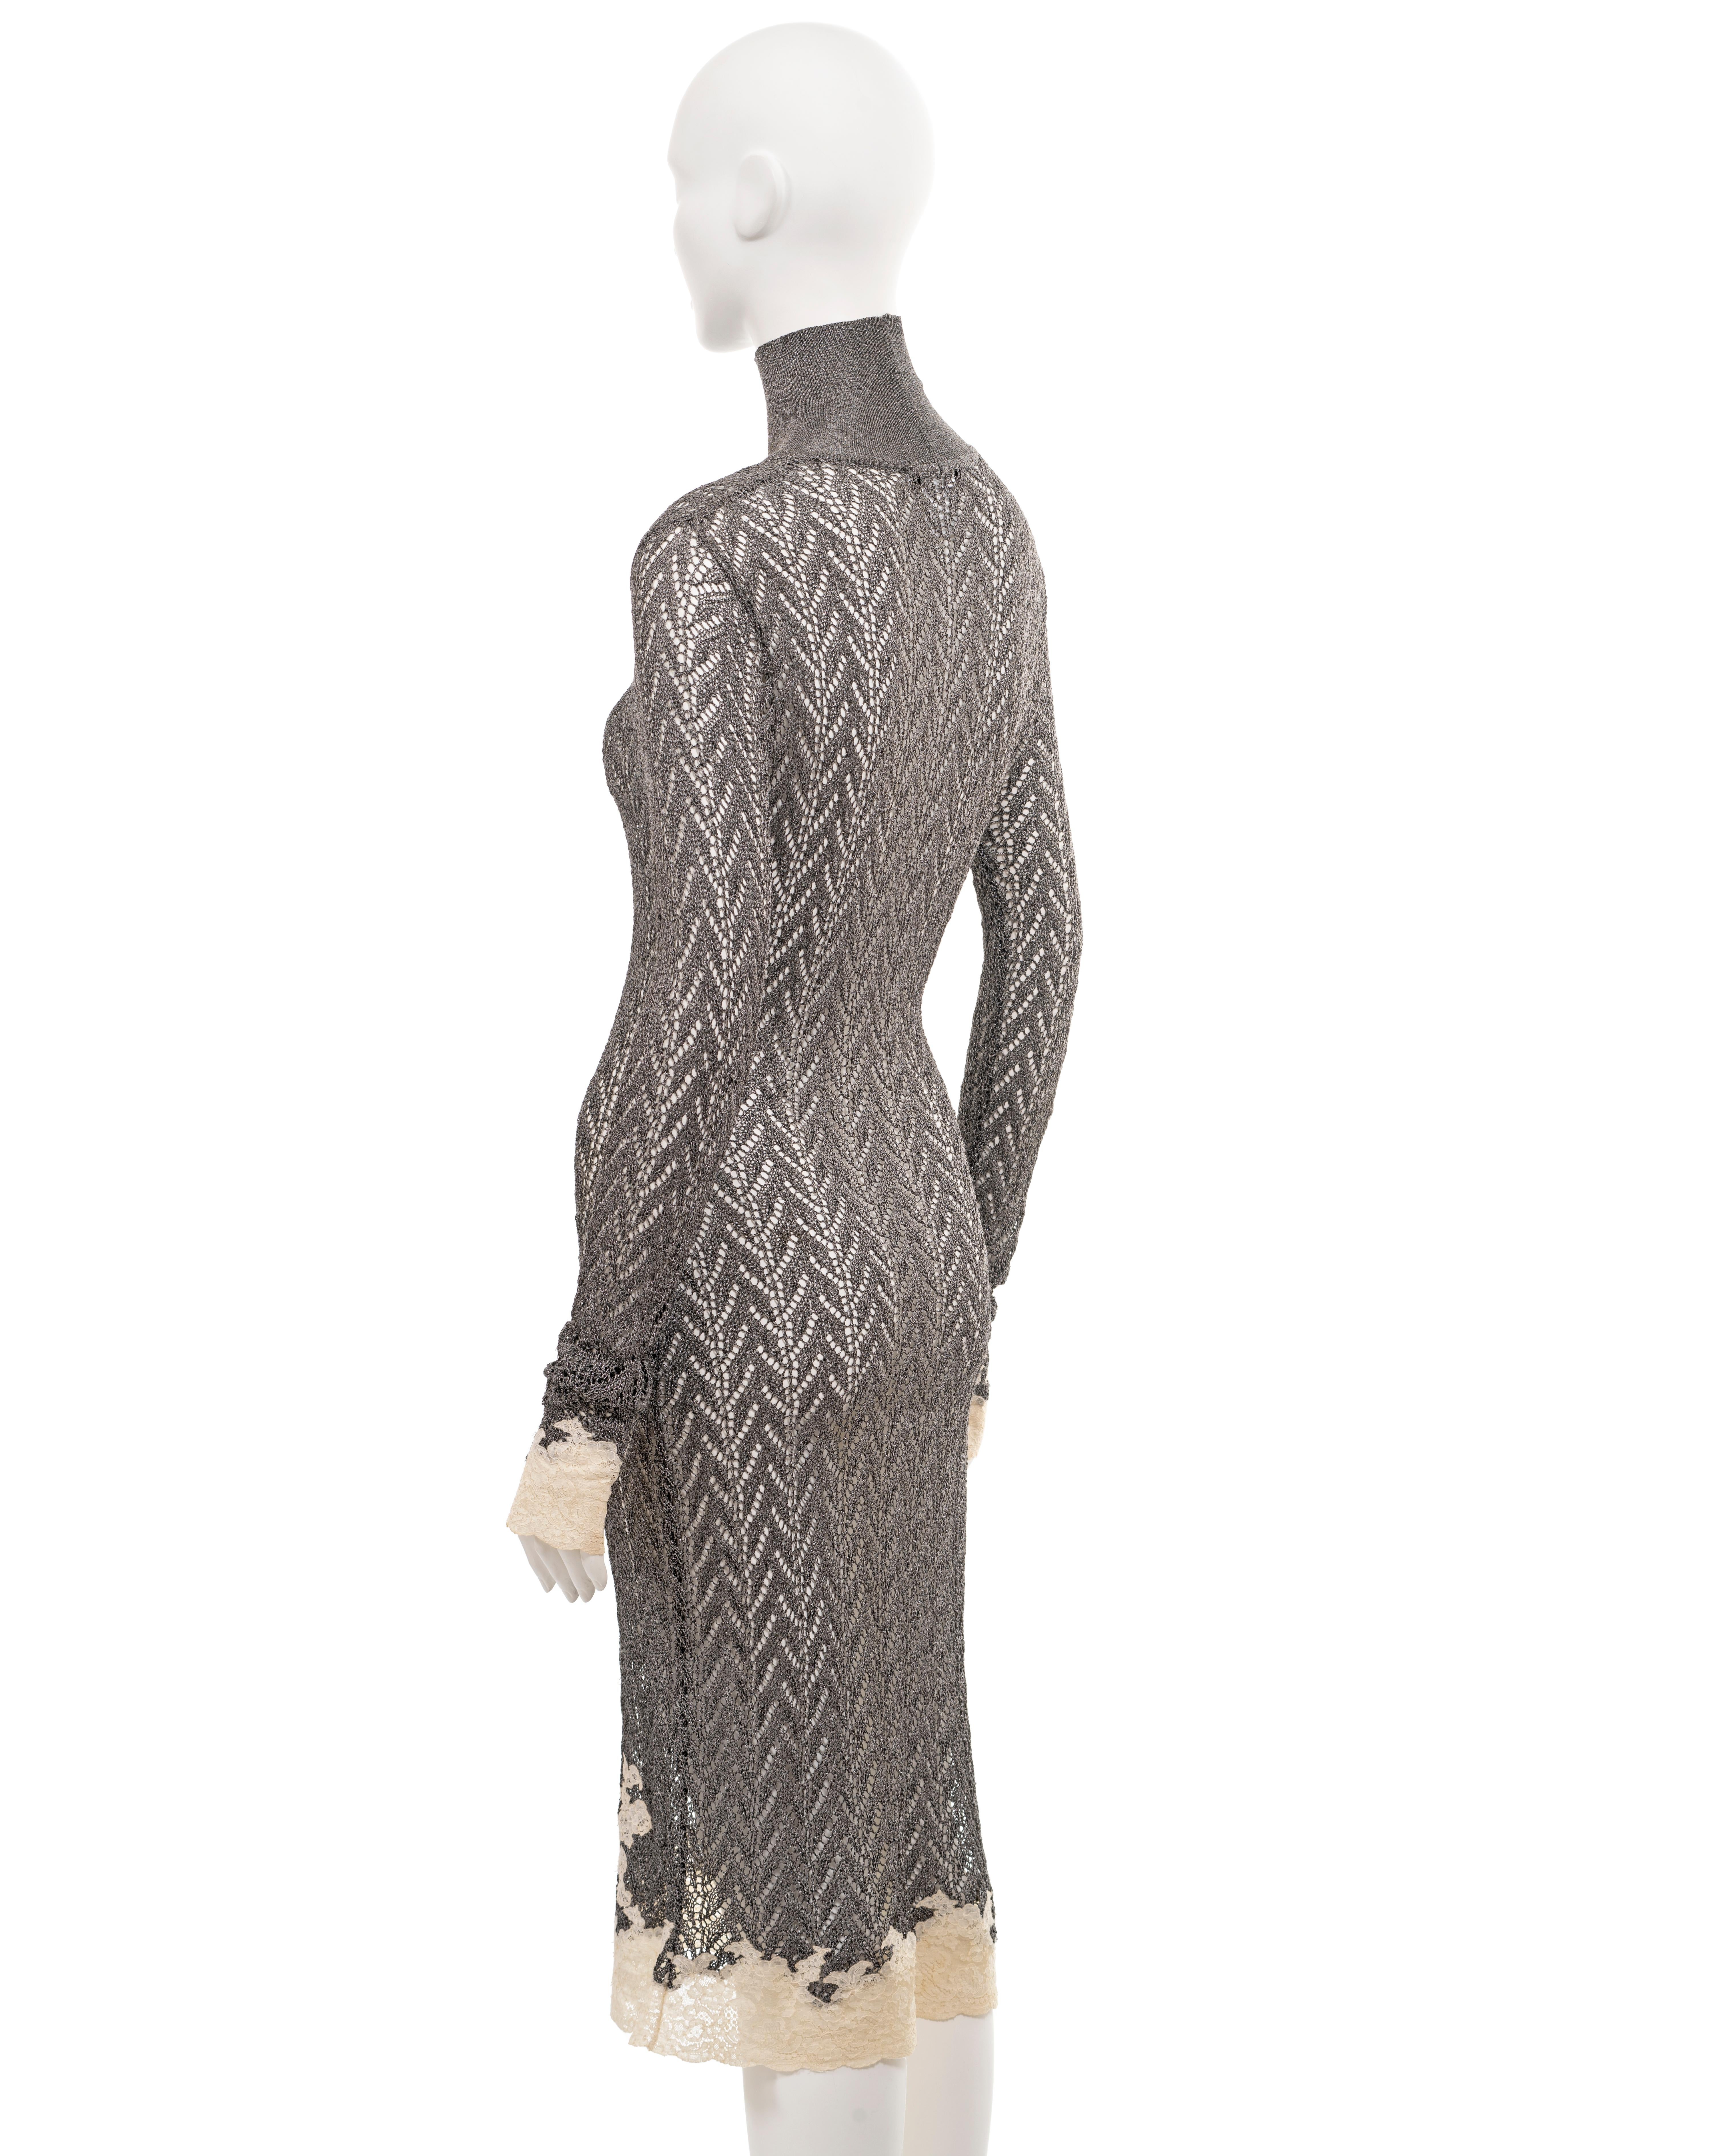 Christian Dior by John Galliano silver open-knit dress with lace trim, fw 1998 For Sale 3